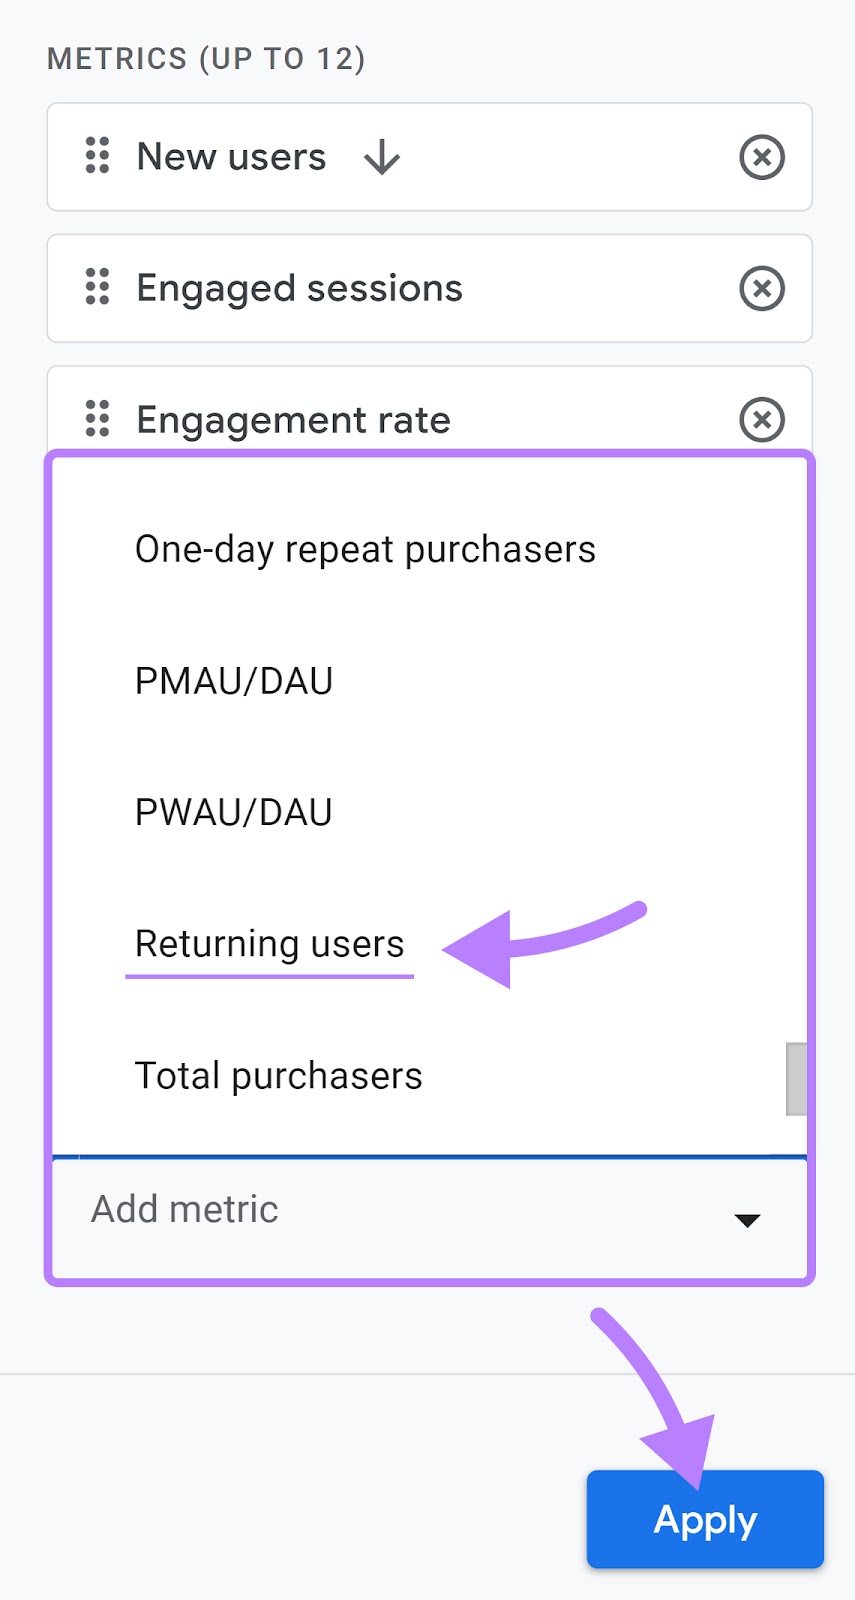 “Returning users" selected from the "Add metric" drop-down menu